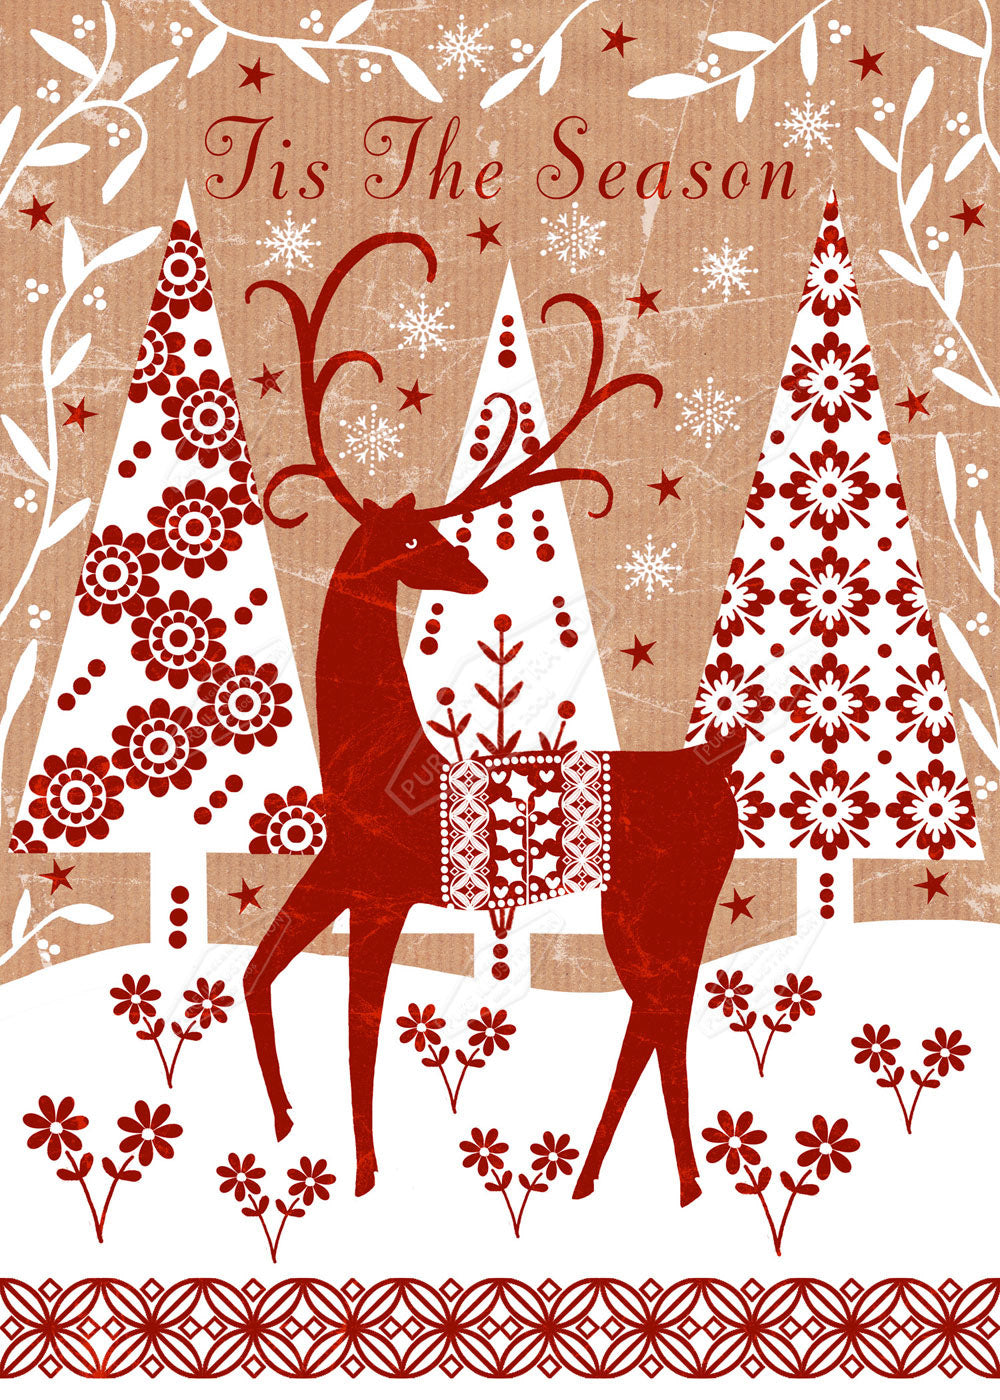 00021884SSN- Sian Summerhayes is represented by Pure Art Licensing Agency - Christmas Greeting Card Design